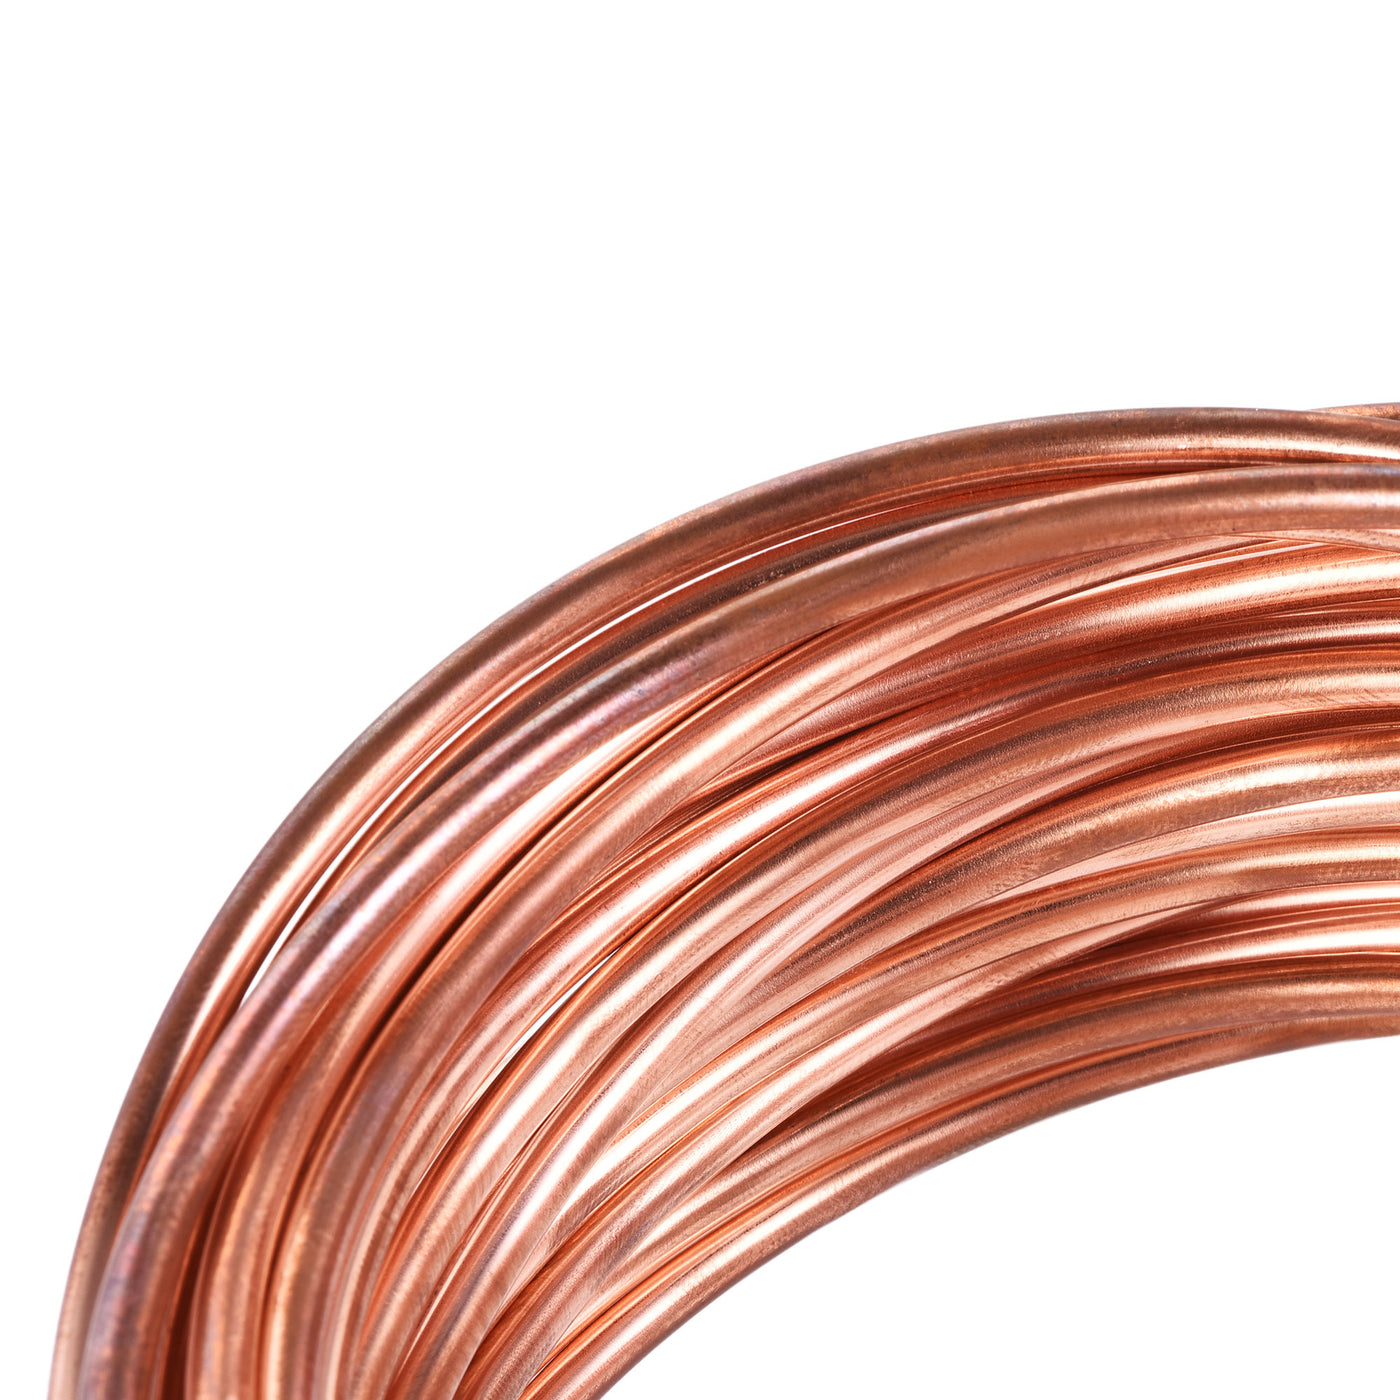 uxcell Uxcell Refrigeration Tubing Copper Tubing Coil for Refrigerator HVAC